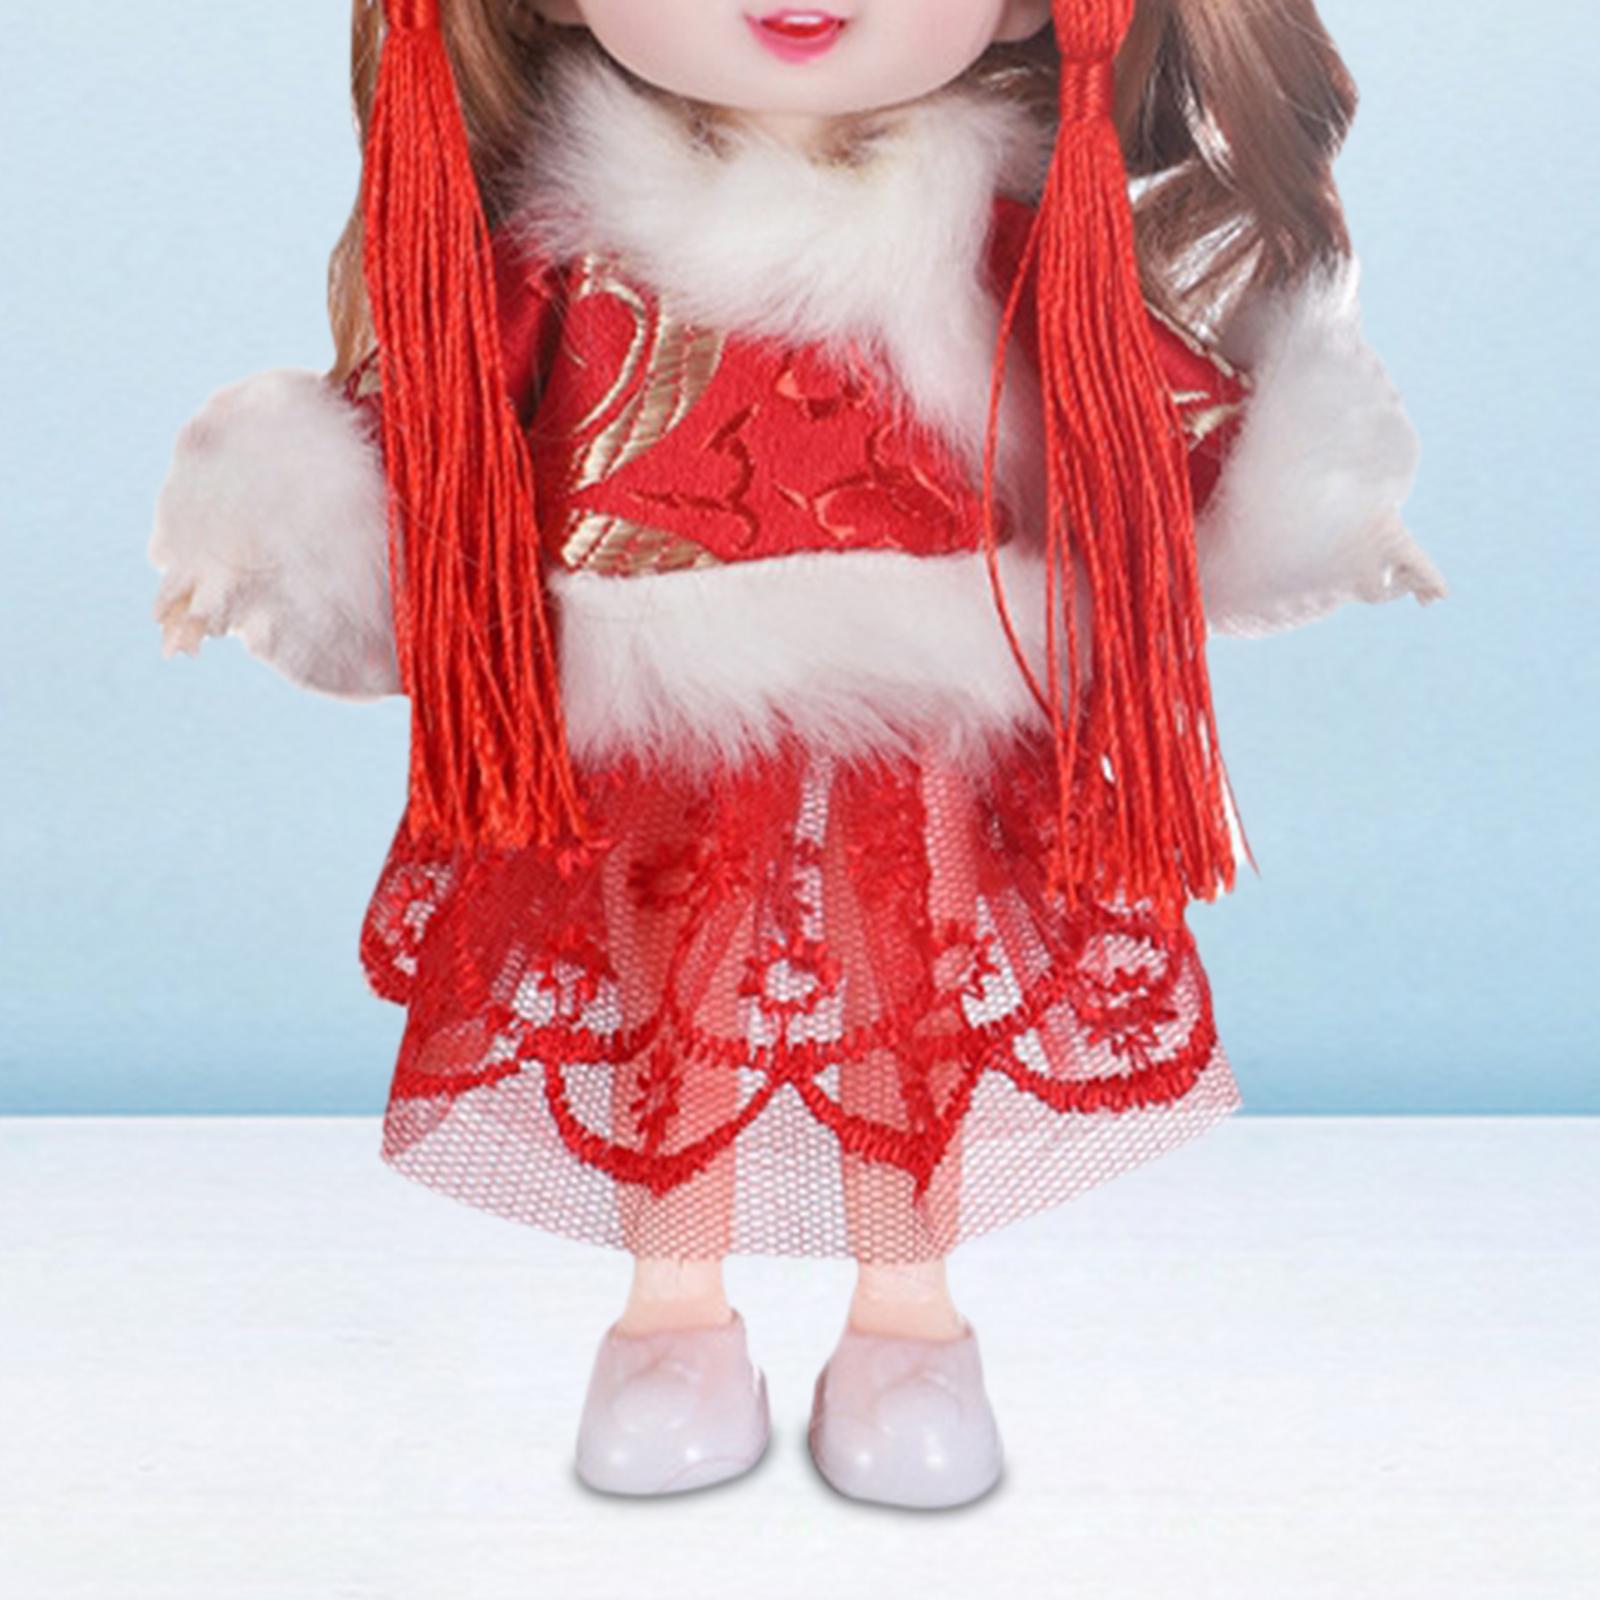 Handmade Doll Clothes Set Doll Dress Daily Wear Clothing for 17cm Doll Ob11 Doll Accessory Costume